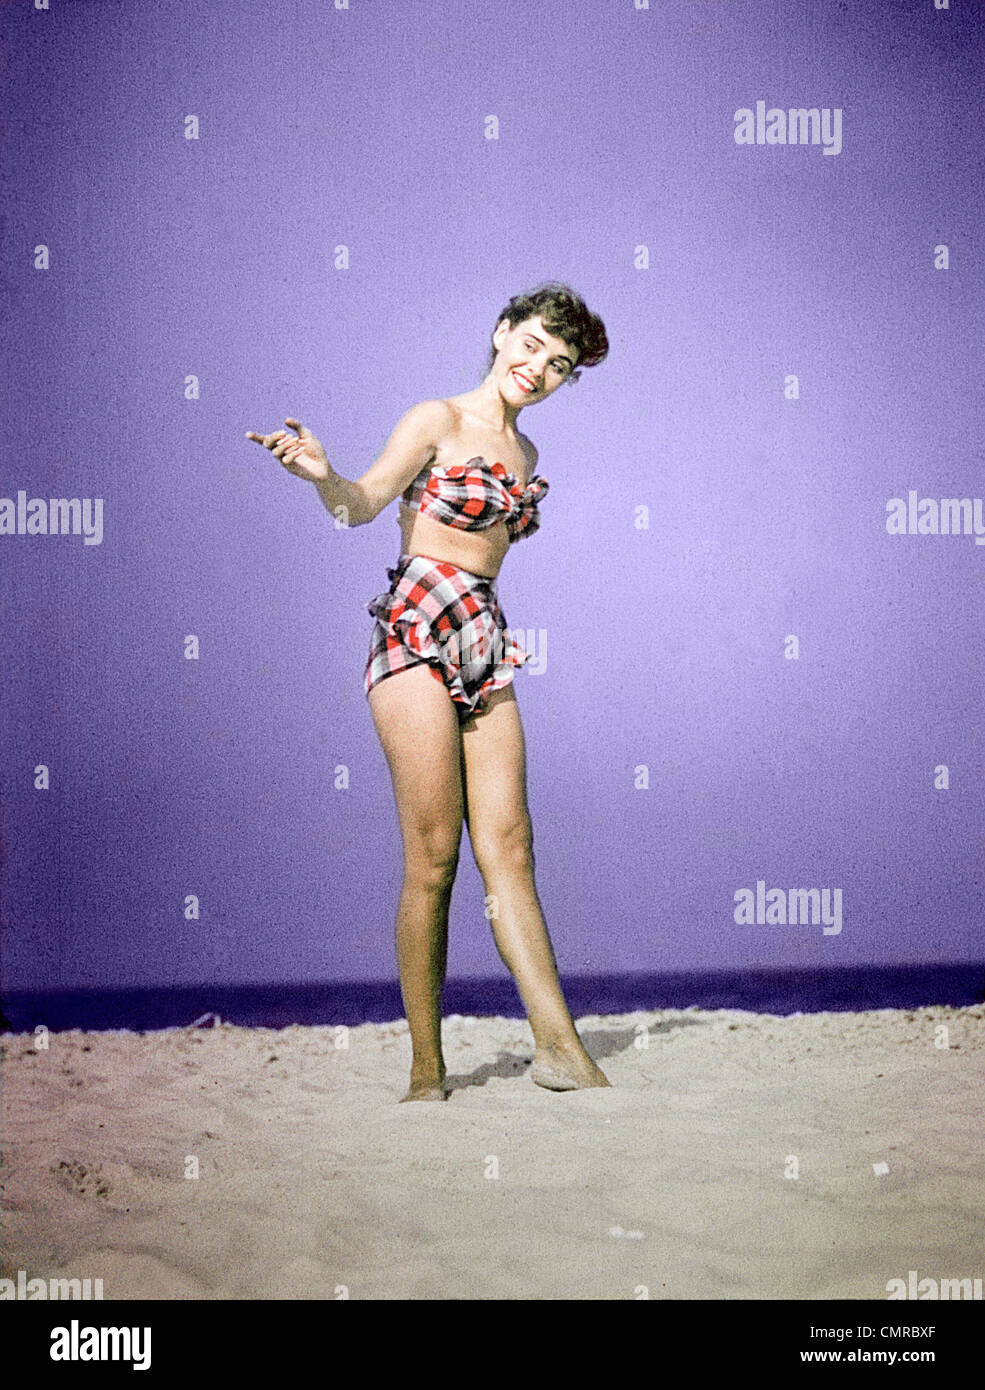 1940s 1950s SMILING YOUNG WOMAN WEARING PLAID TWO PIECE BATHING SUIT STANDING ON BEACH SAND Stock Photo